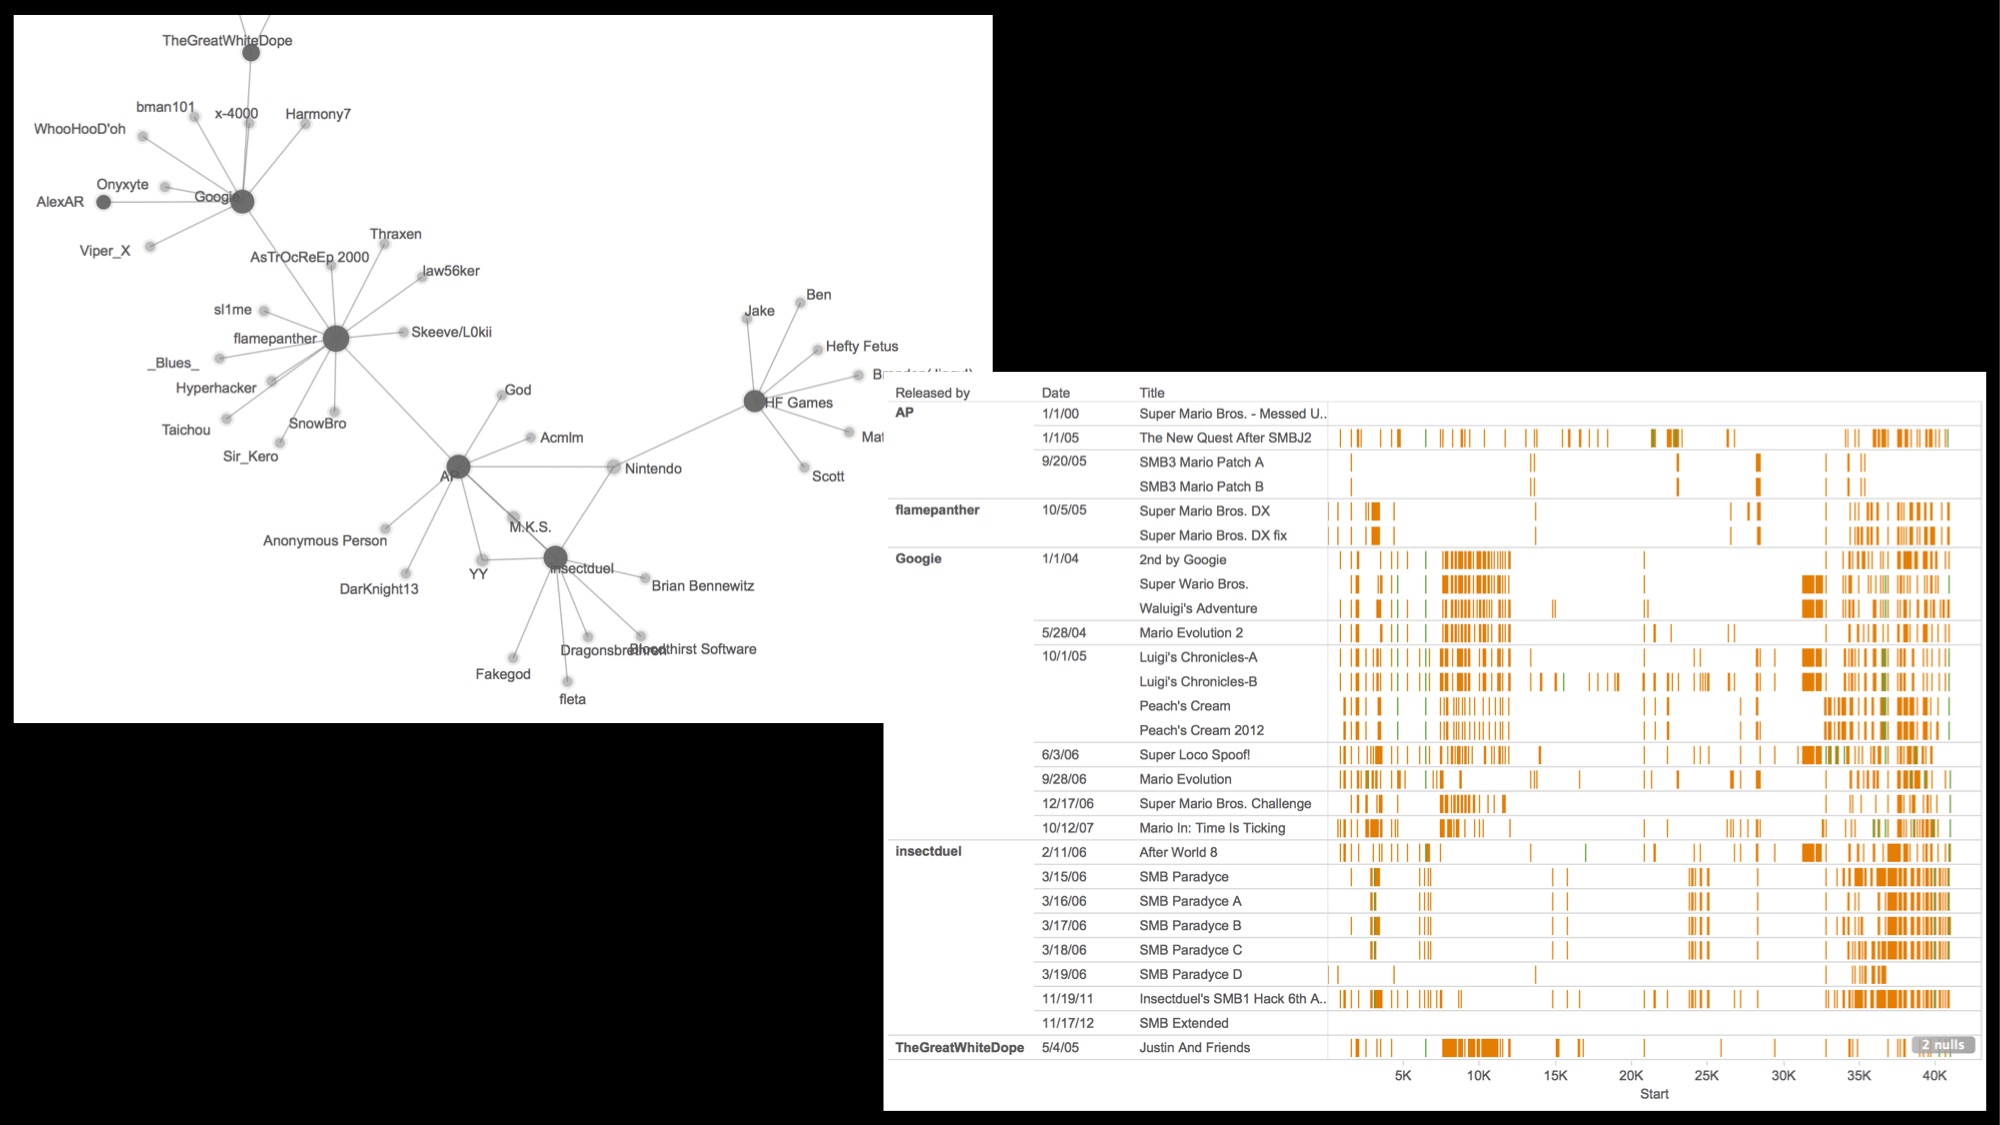 Screenshots: Palladio network graph of references to SMB3 (left) and Tableau visualization of those modders' code